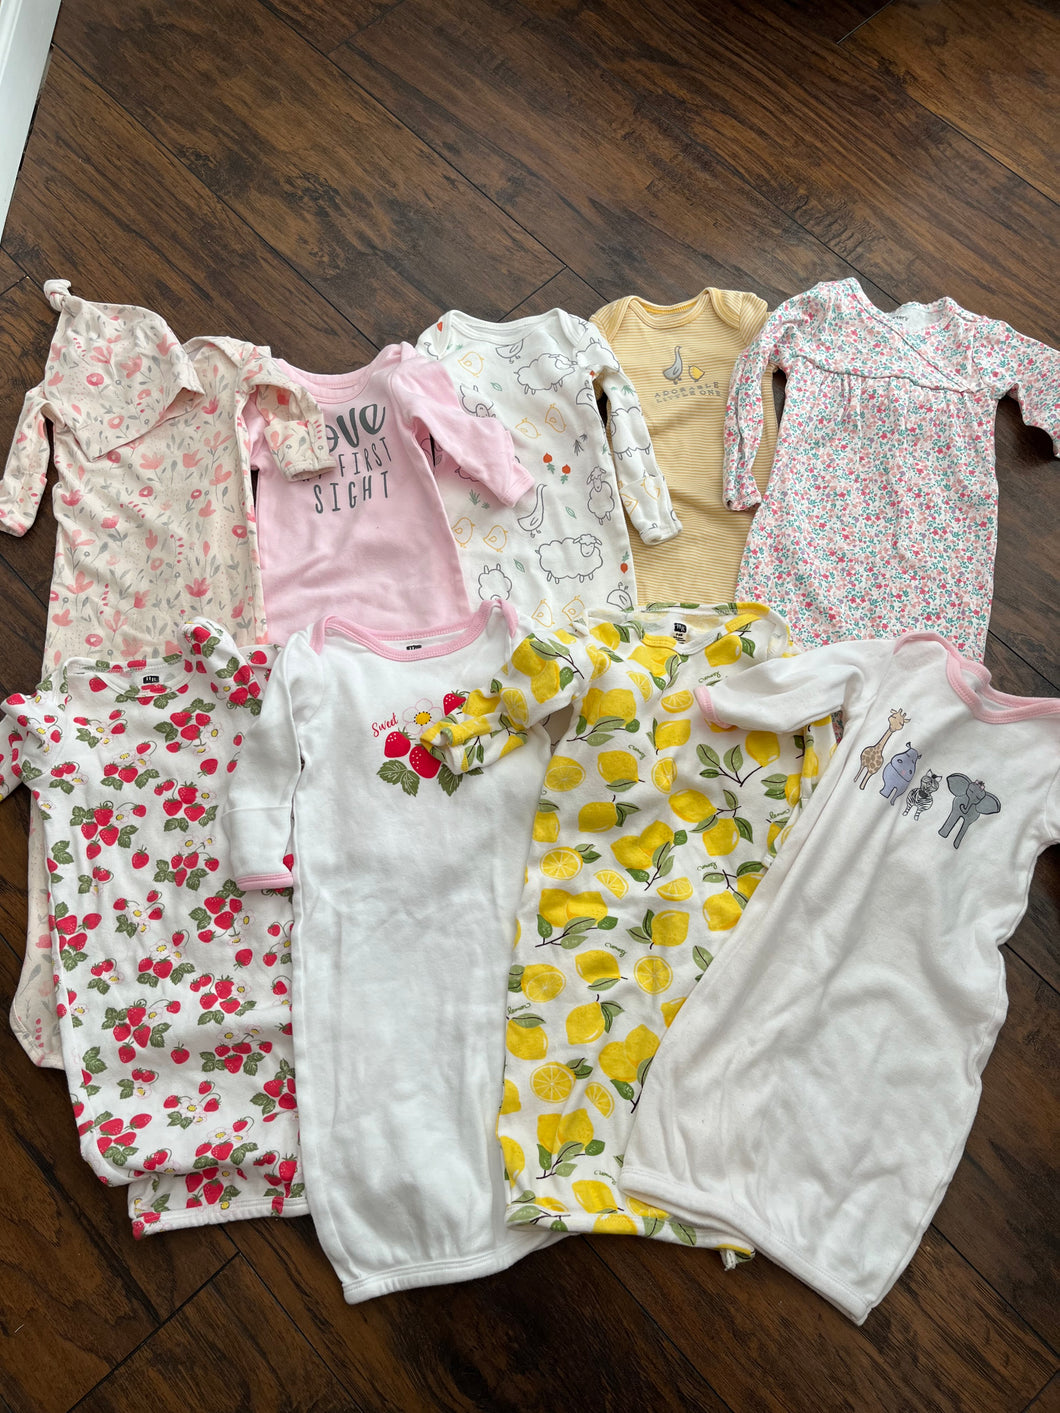 Bundle of 9 Infant Gowns Size 0-6 months. Brands include Carter's, Aden & Anais, Gigi and Max, and HB. 3 months